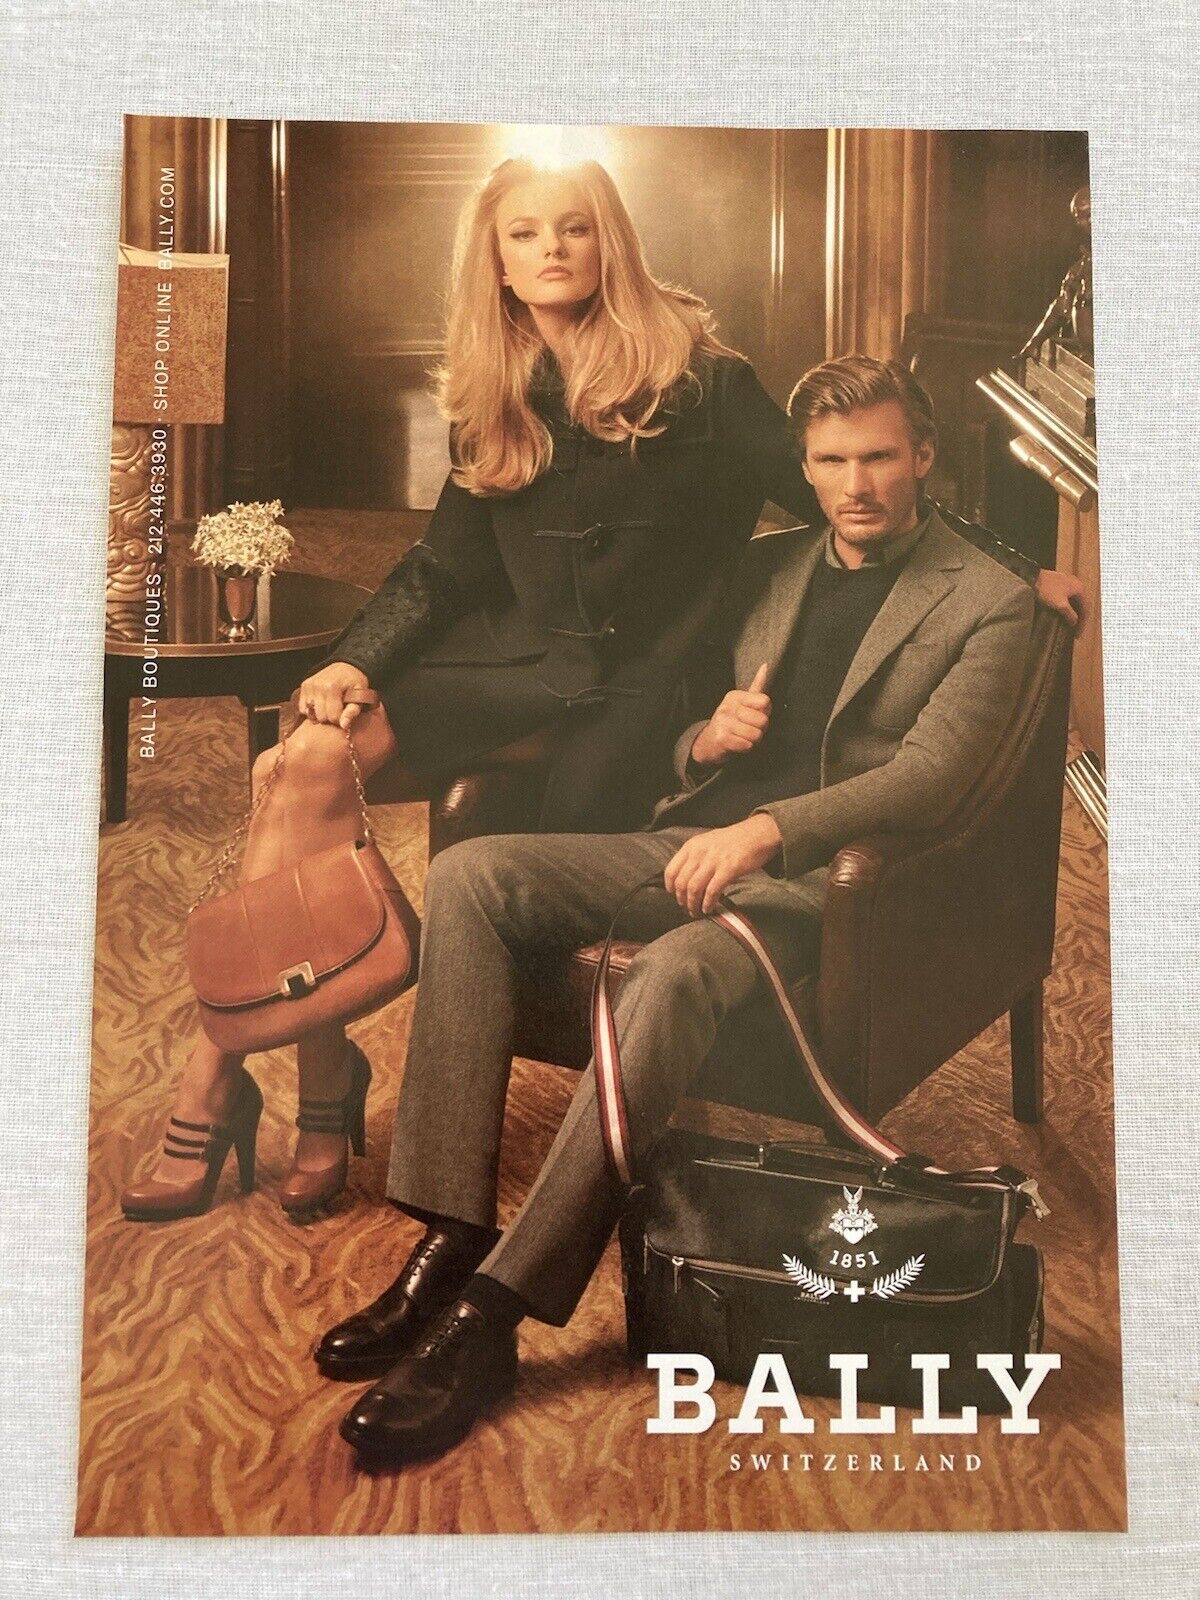 2011 Bally Switzerland Print Ad 1 D/S Page Feet Long Legs Ankles High Heel Shoes